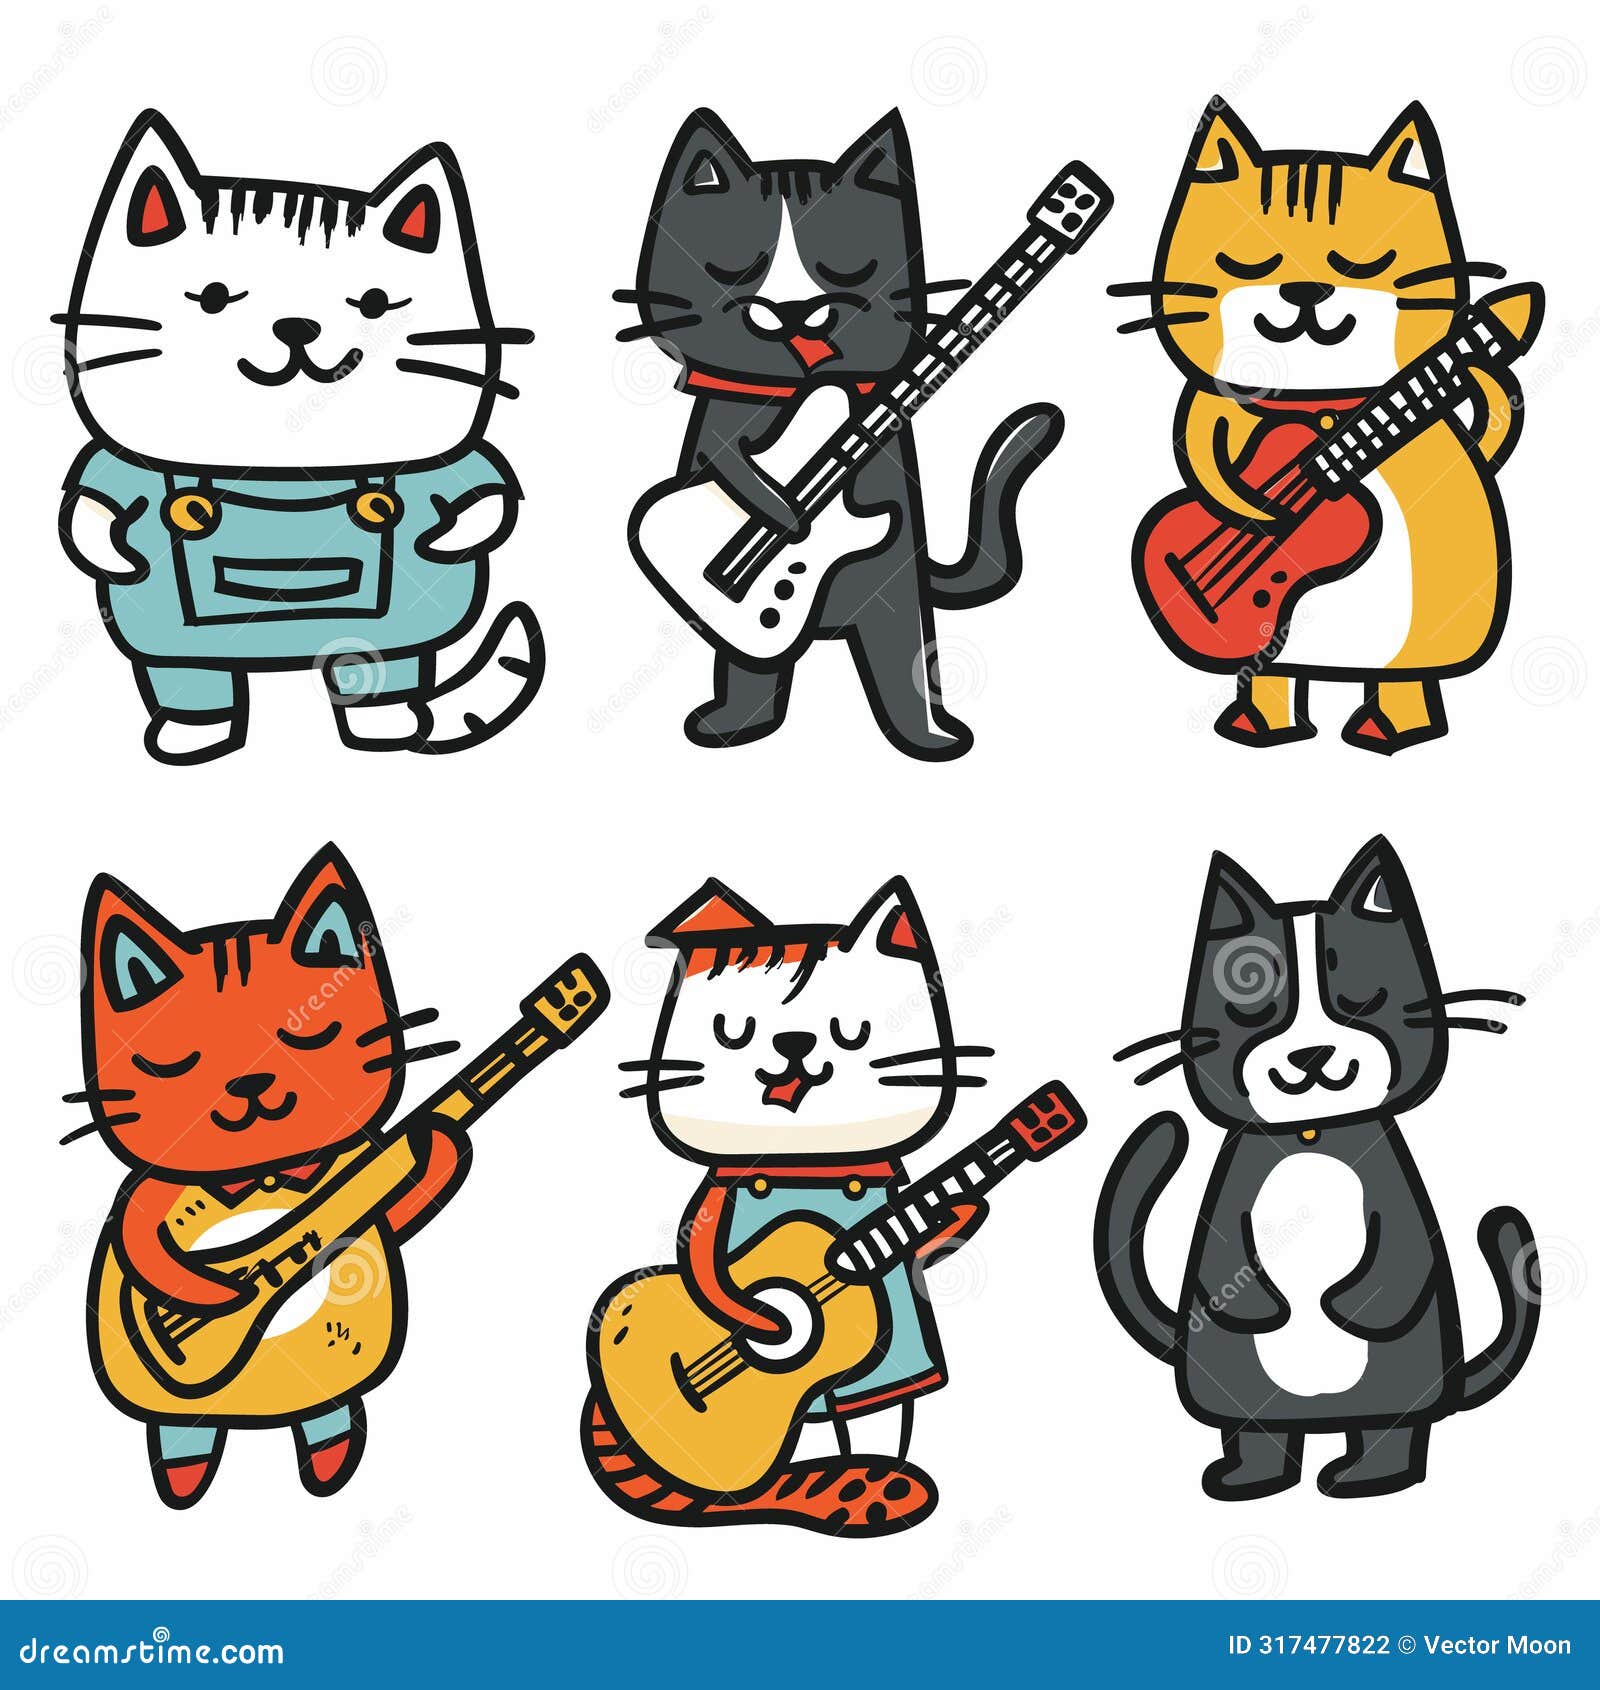 six cartoon cats playing guitars, unique colors expressions. cats wearing various outfits